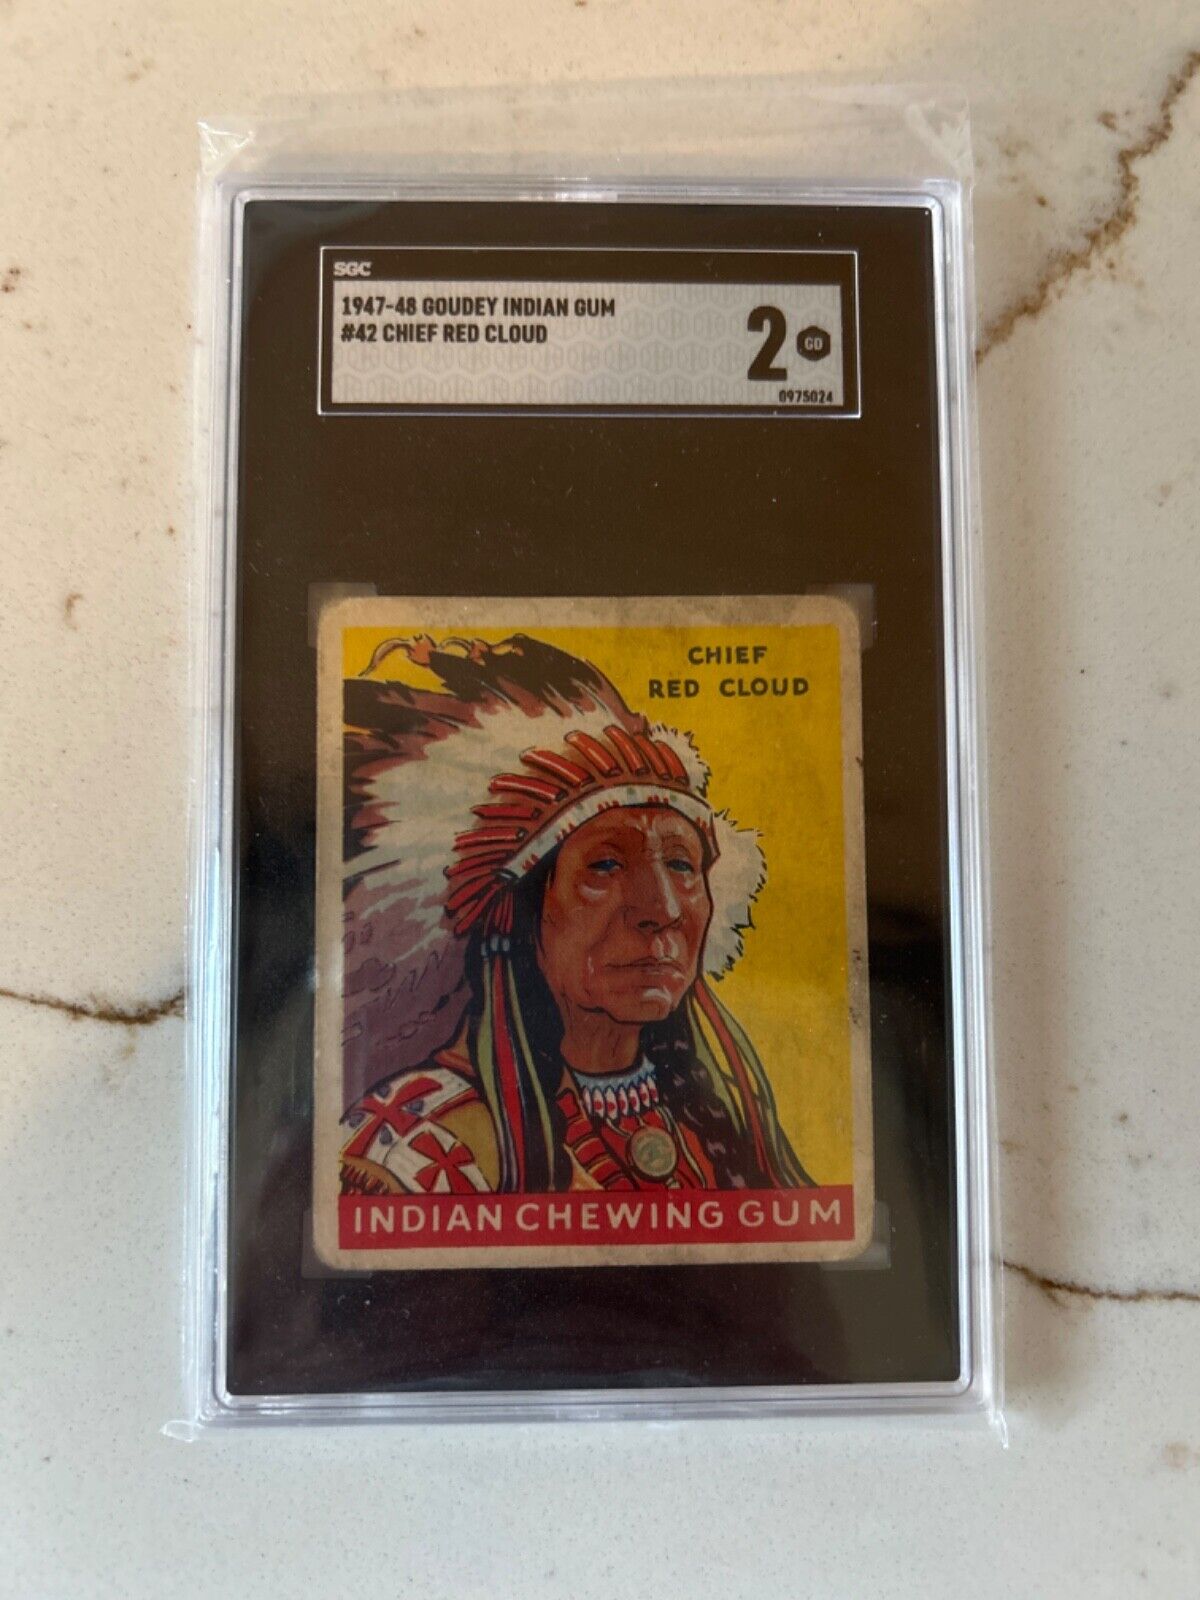 1947 #42 Chief Red Cloud, Indian Gum From original collection